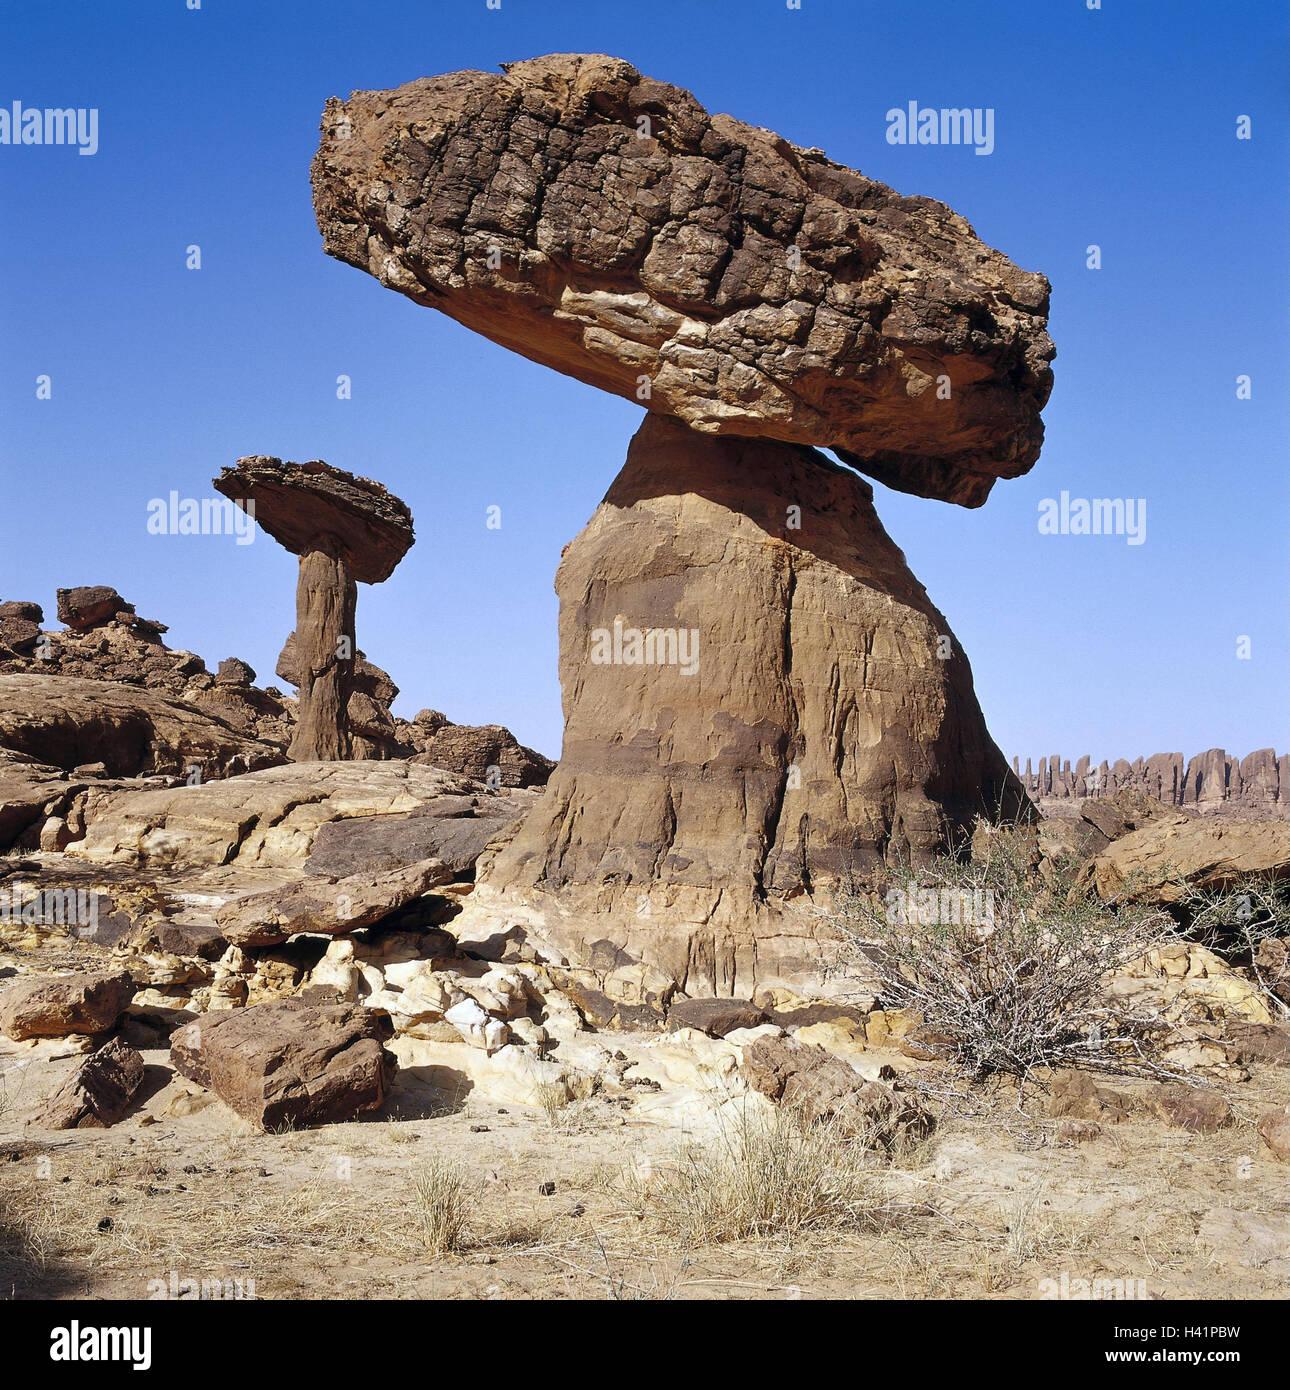 Chad, mesa country Ennedi, Georges d'Archei, Fada, bile formations Central, Africa, landlocked country, Sahara, mountainous country, sediment rock, rock, bile formation, 'fairy chimneys', boulders, nature, Stock Photo